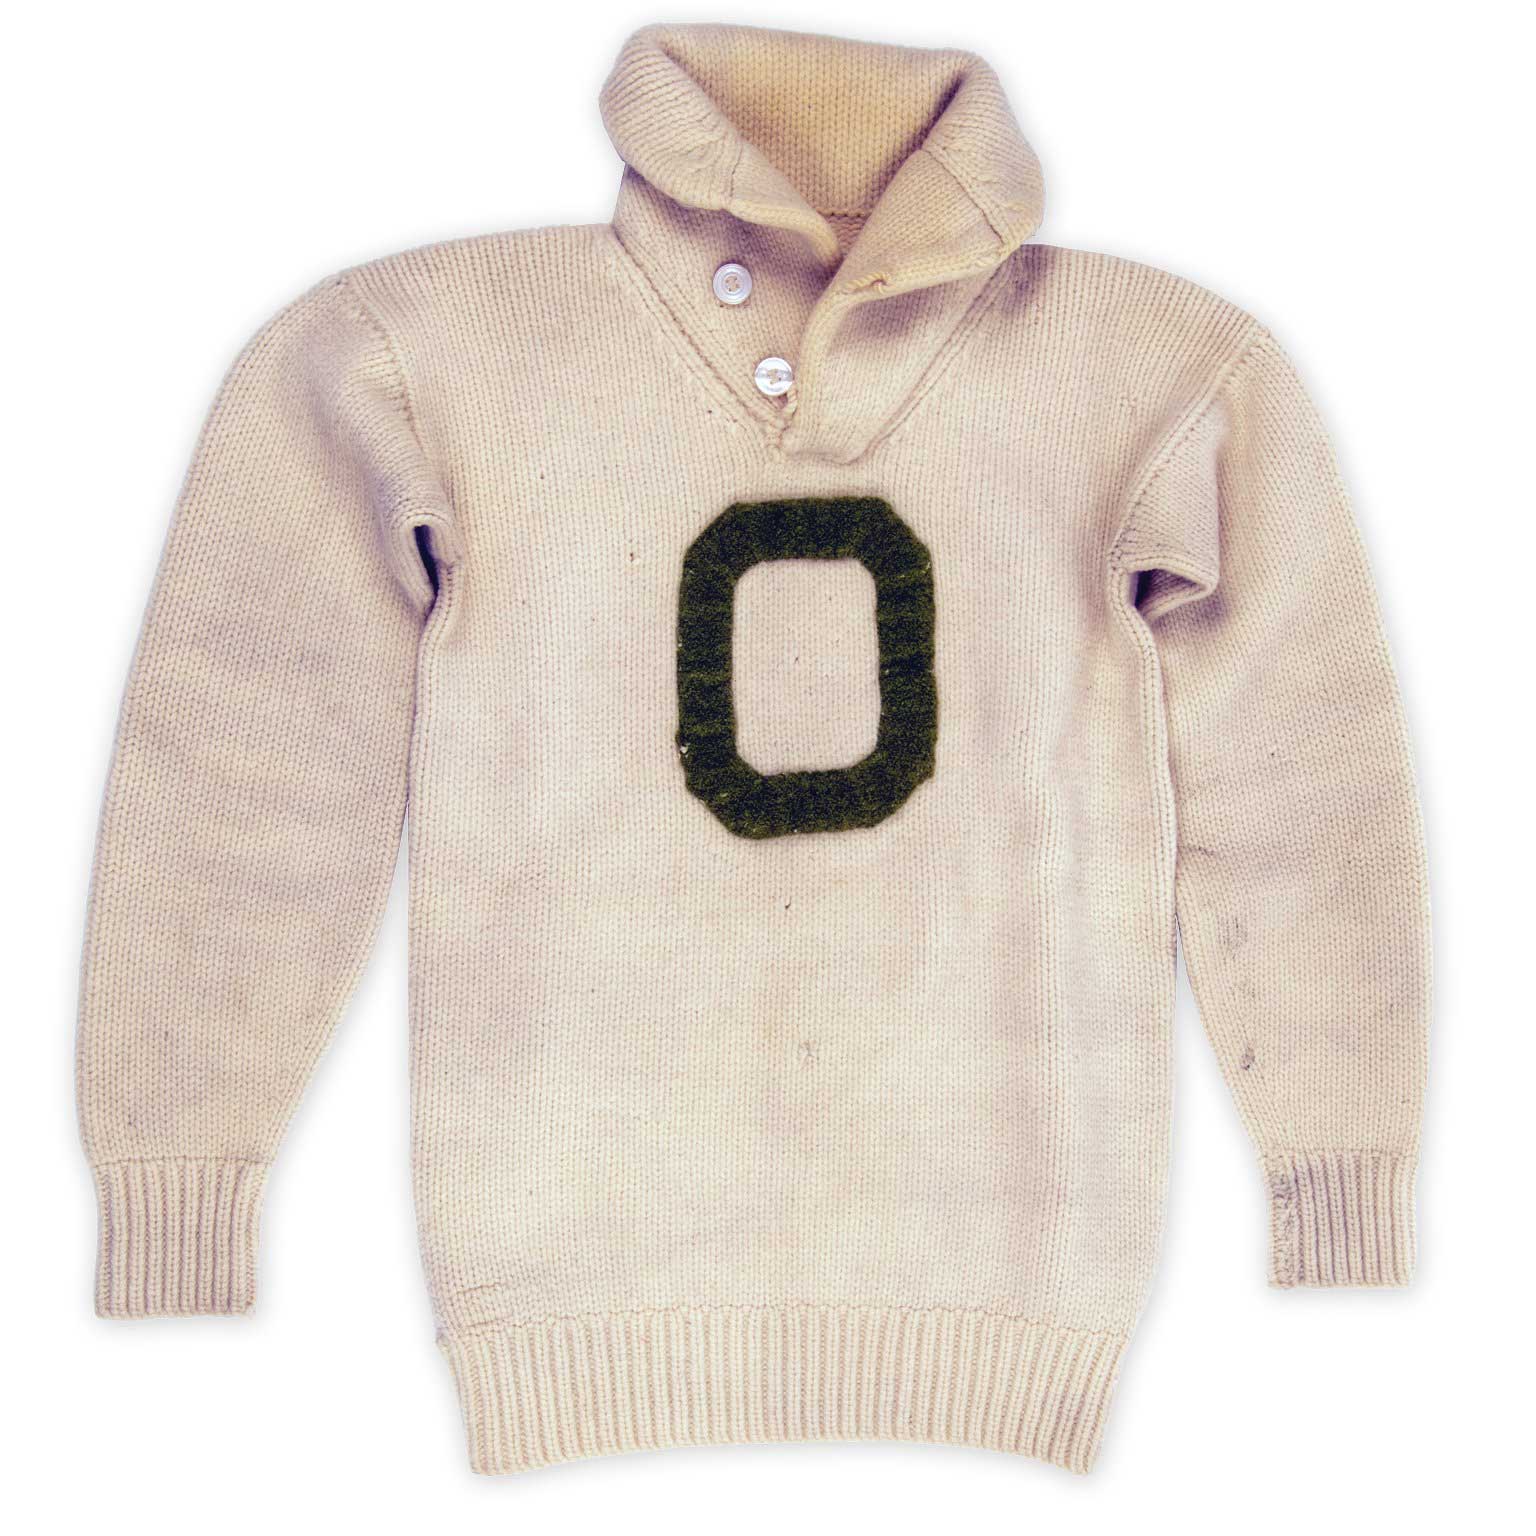 This is an early-20th-century, 100% wool OHIO sweater.